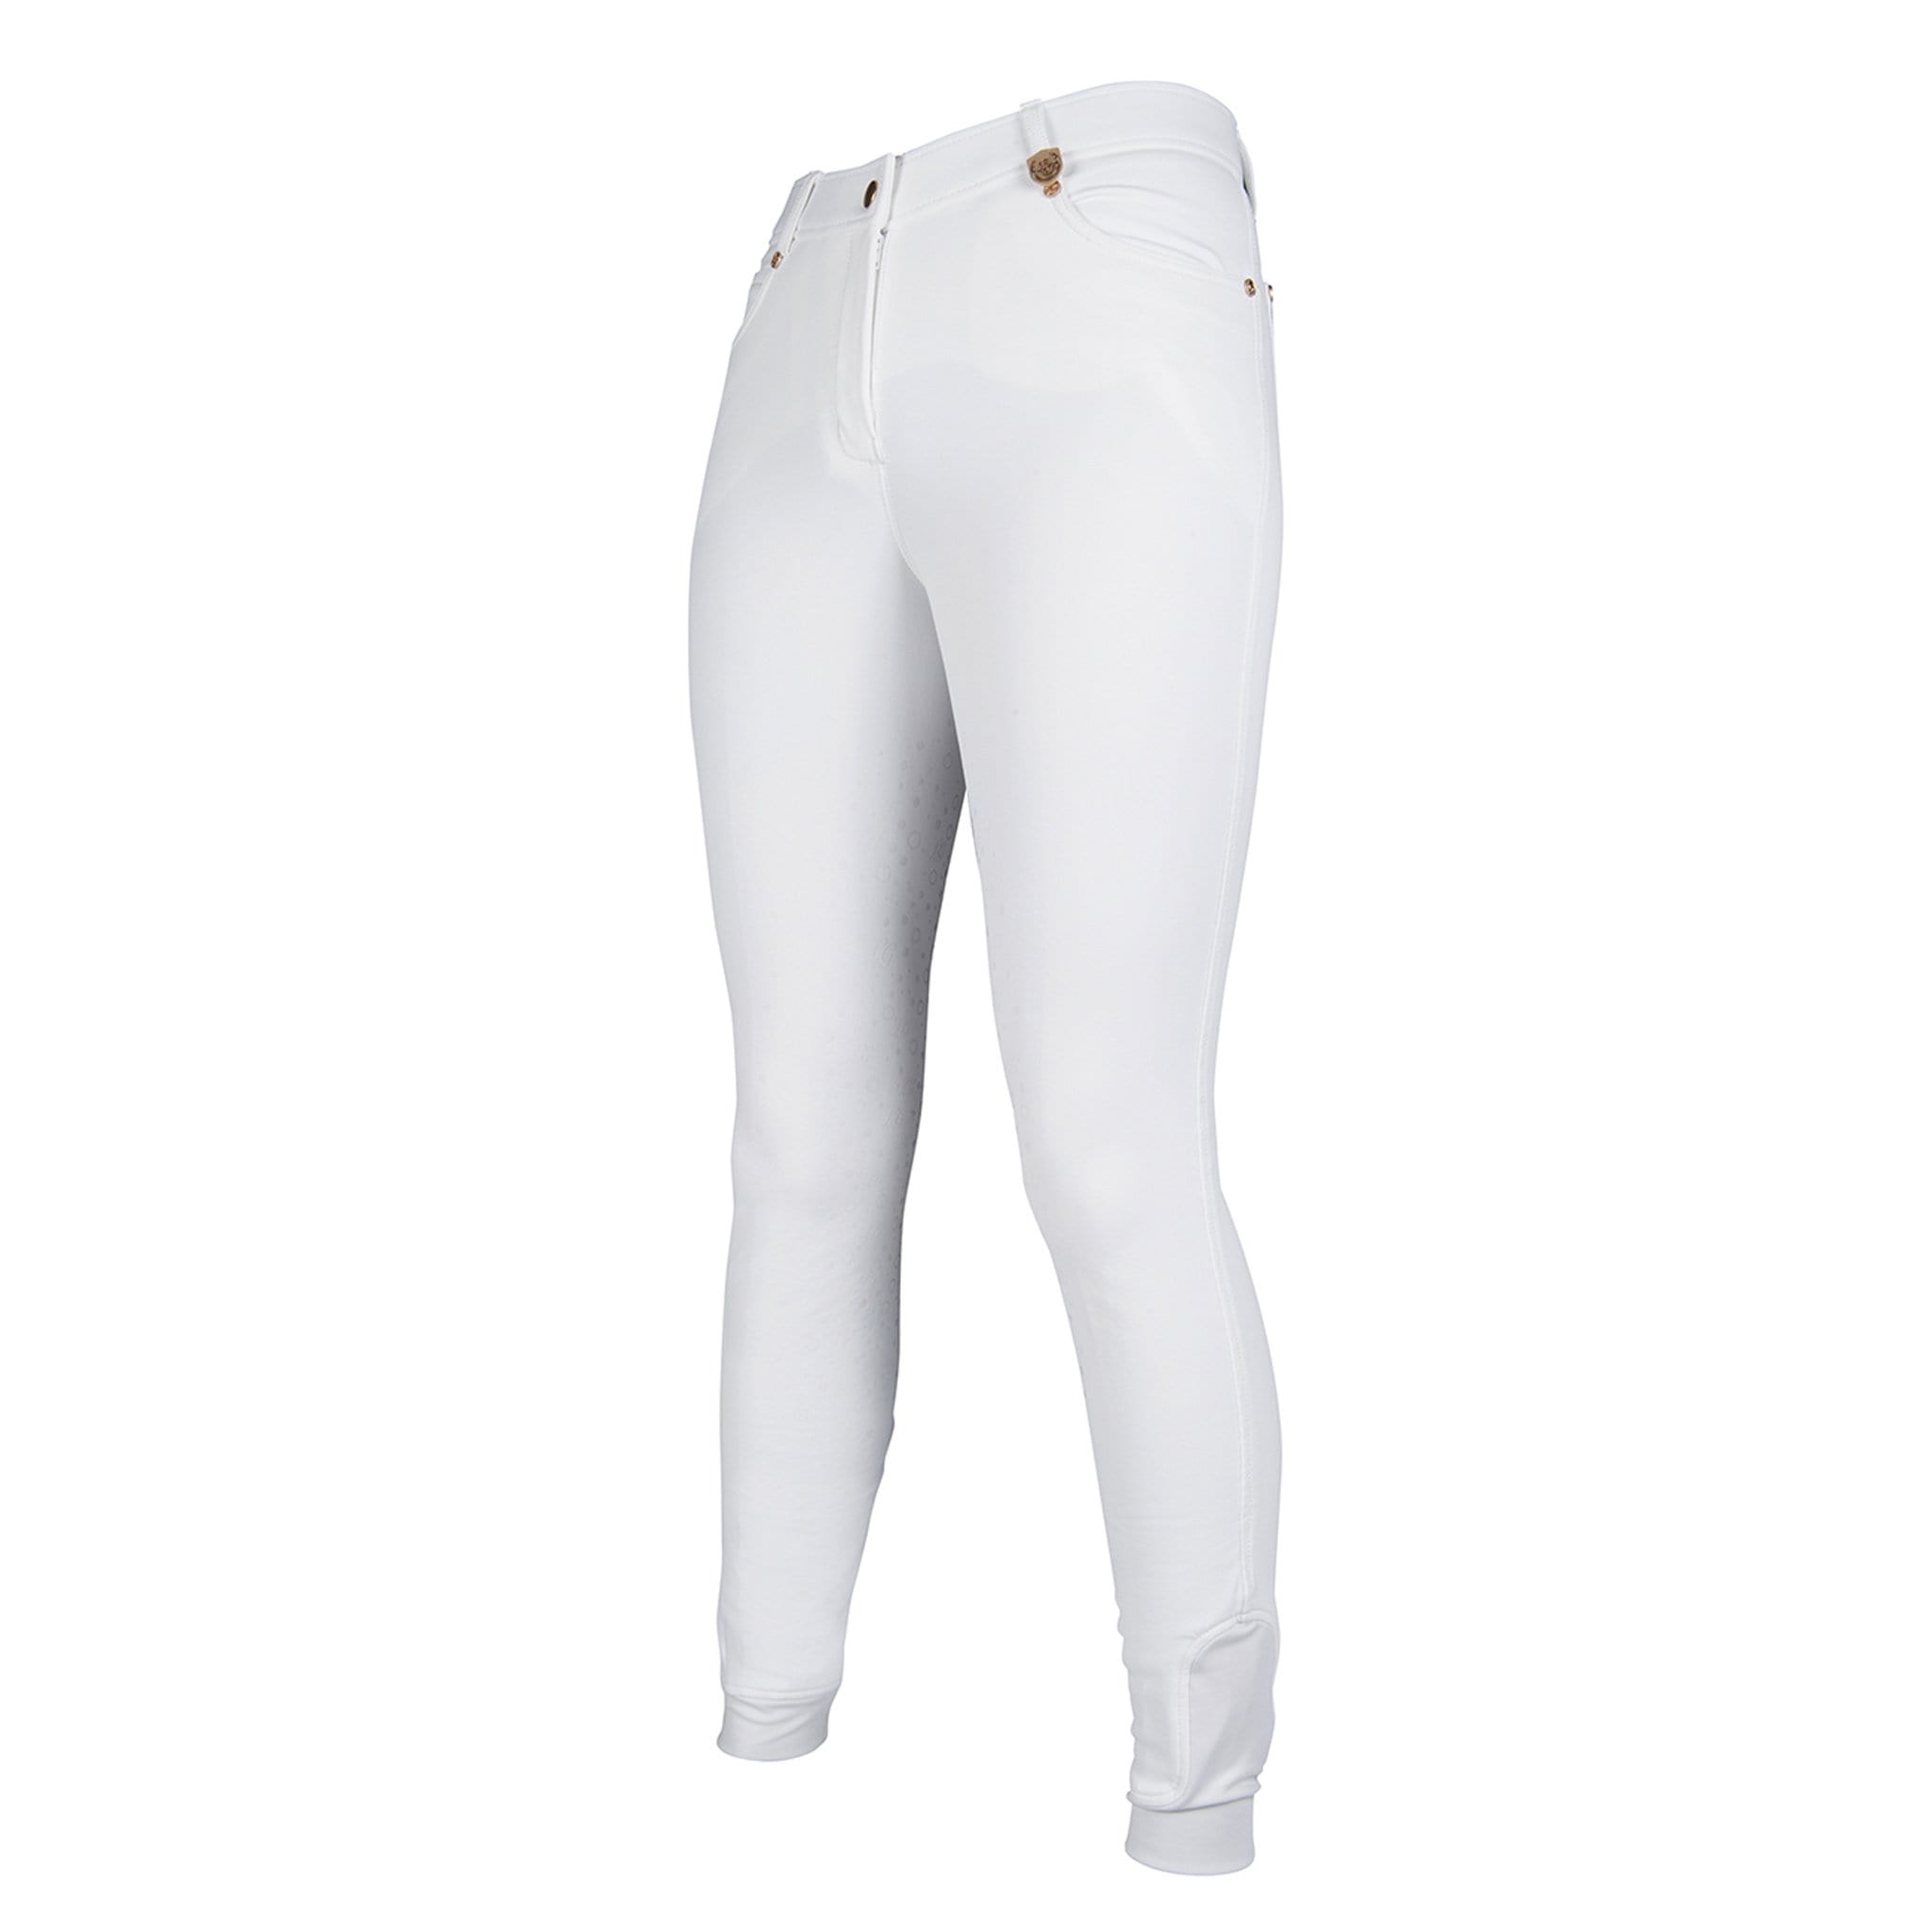 HKM Lauria Garrelli Full Seat Silicone Breeches 9248 White Front and Side